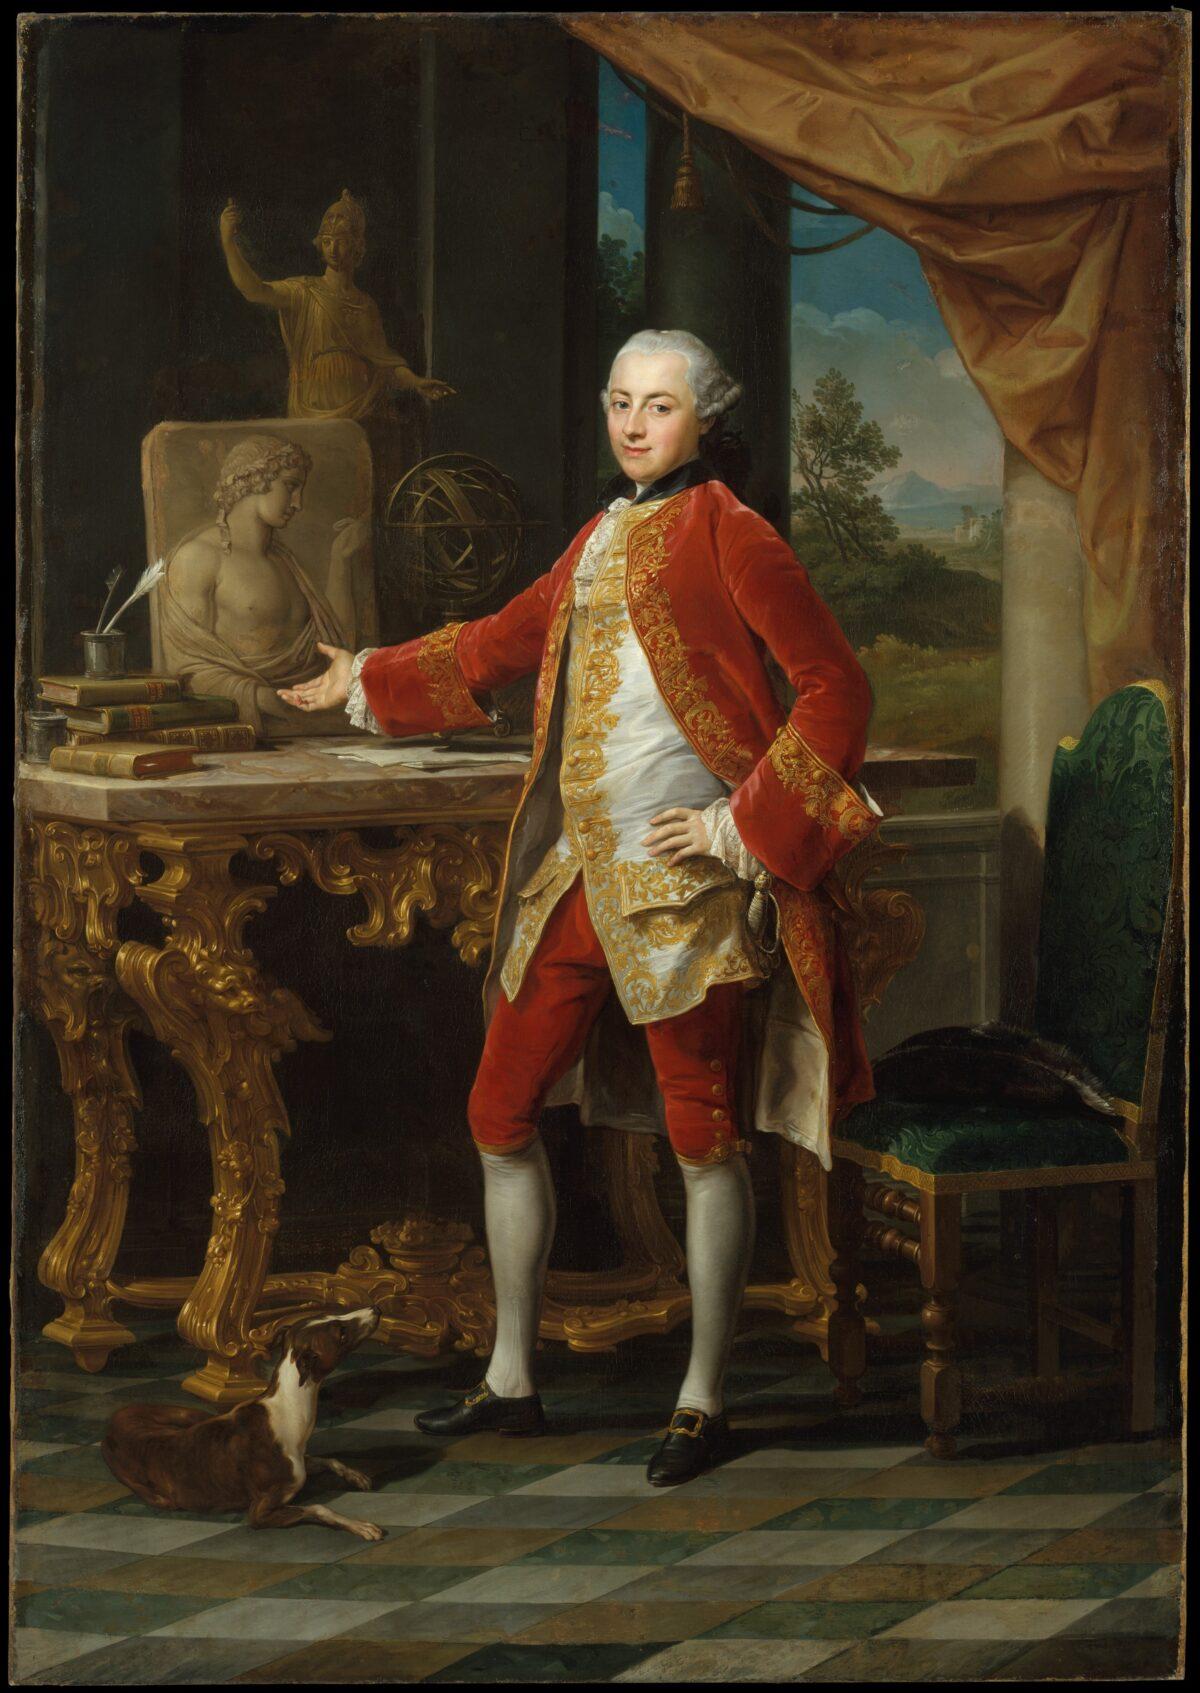 “Portrait of a Young Man,” circa 1760–65 by Pompeo Batoni. Oil on Canvas, 97 1/8 inches by 69 1/4 inches. The Metropolitan Museum of Art, New York. (Public Domain)